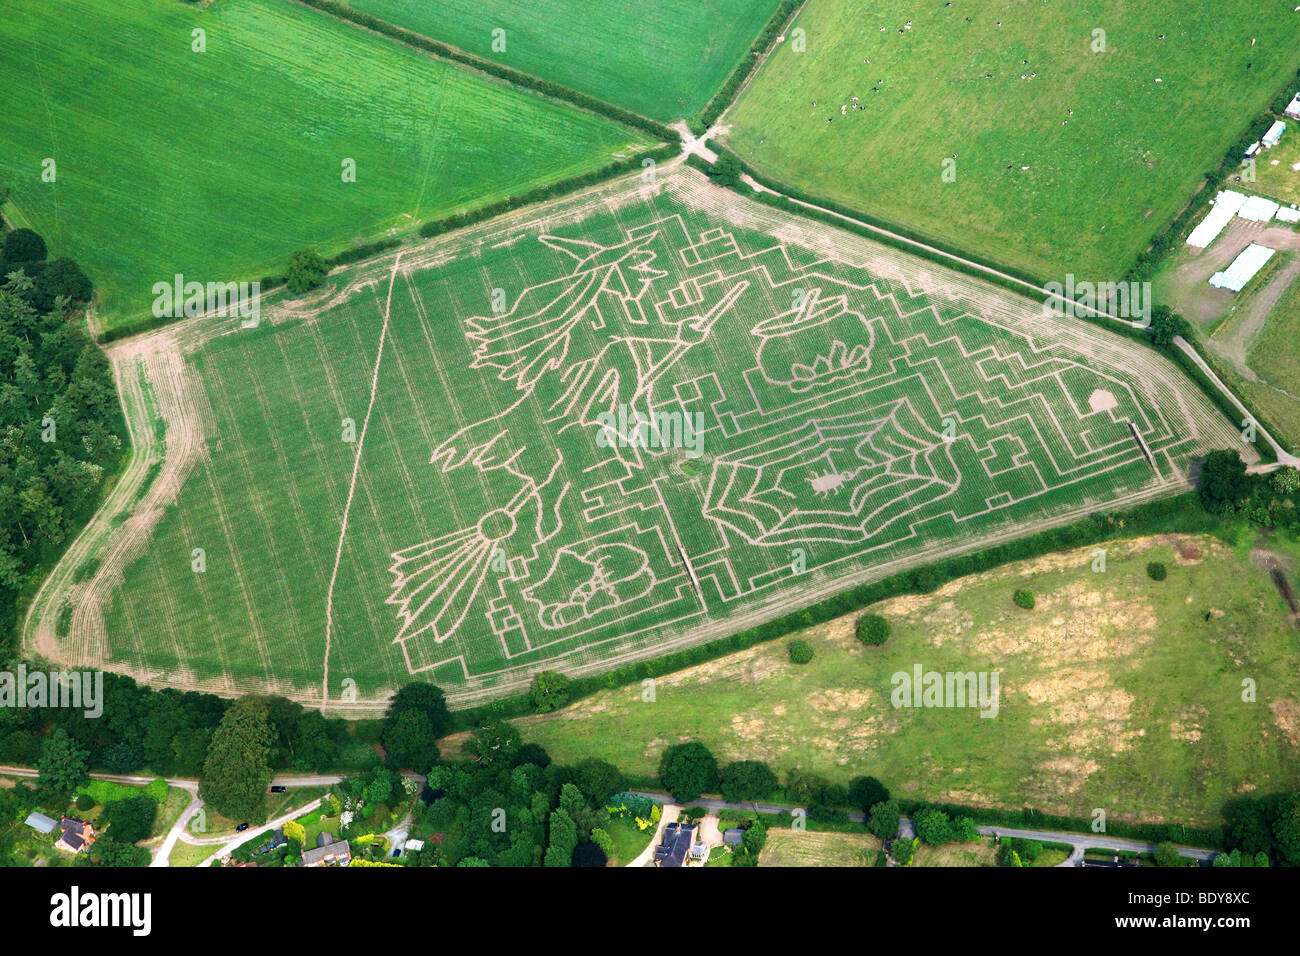 Aerial photograph of Halloween themed maize field Stock Photo